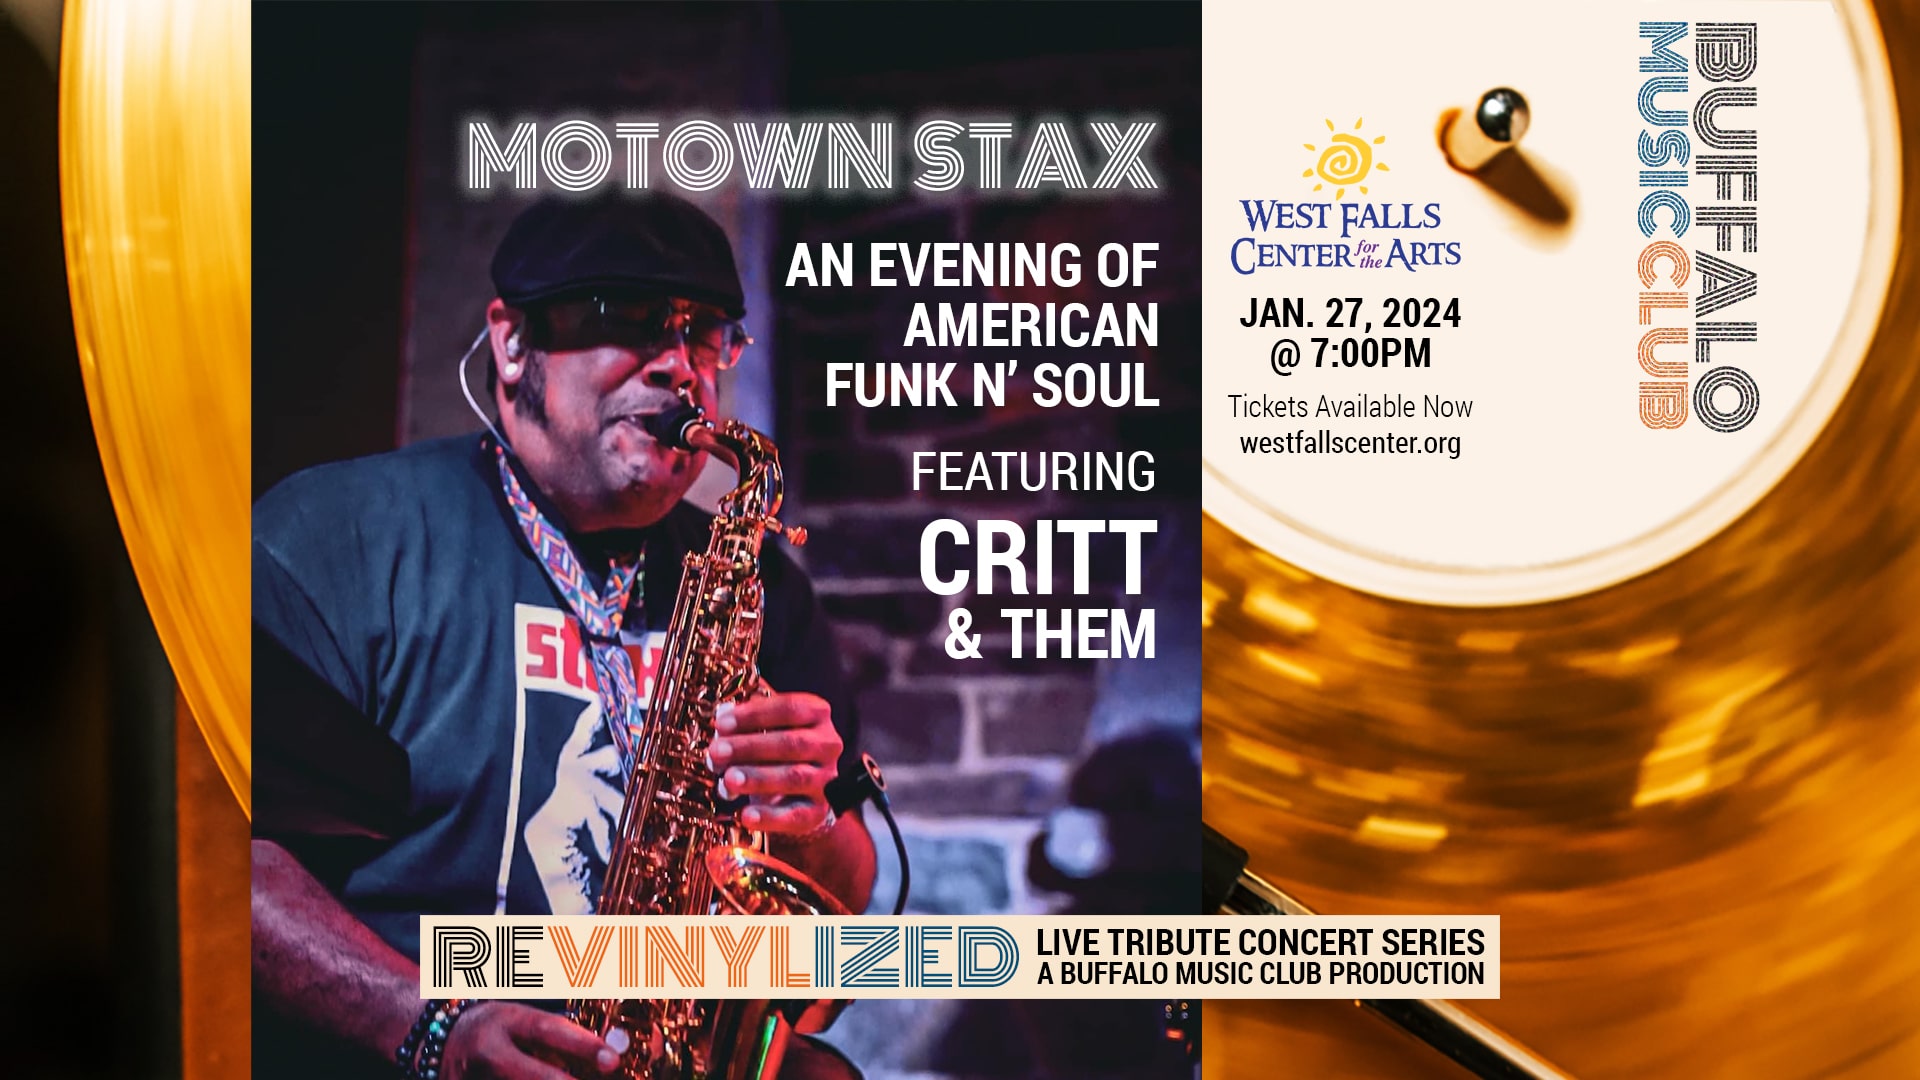 Motown Stax - January 27 2024 - West Falls Center for the Arts - Revinylized - Buffalo Music Club